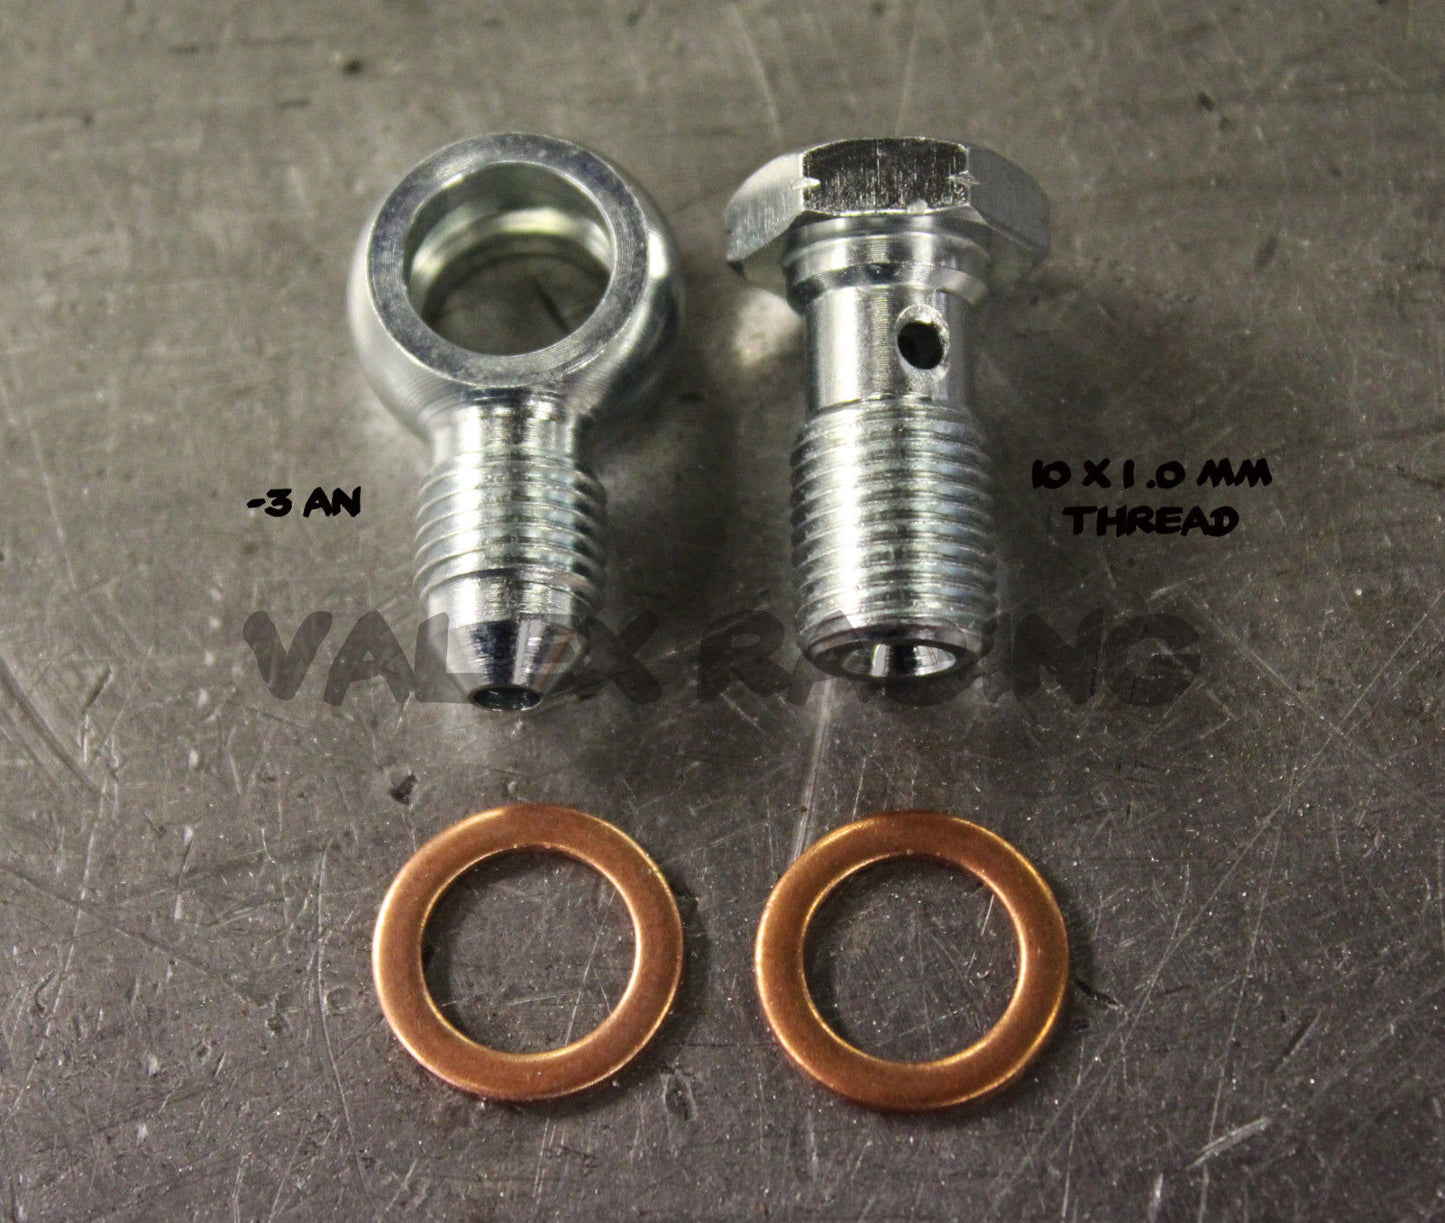 2 Steel Banjo Bolt Fittings M10 x 1.0 (Metric 10mm) to 3AN -3 AN3 PAIR